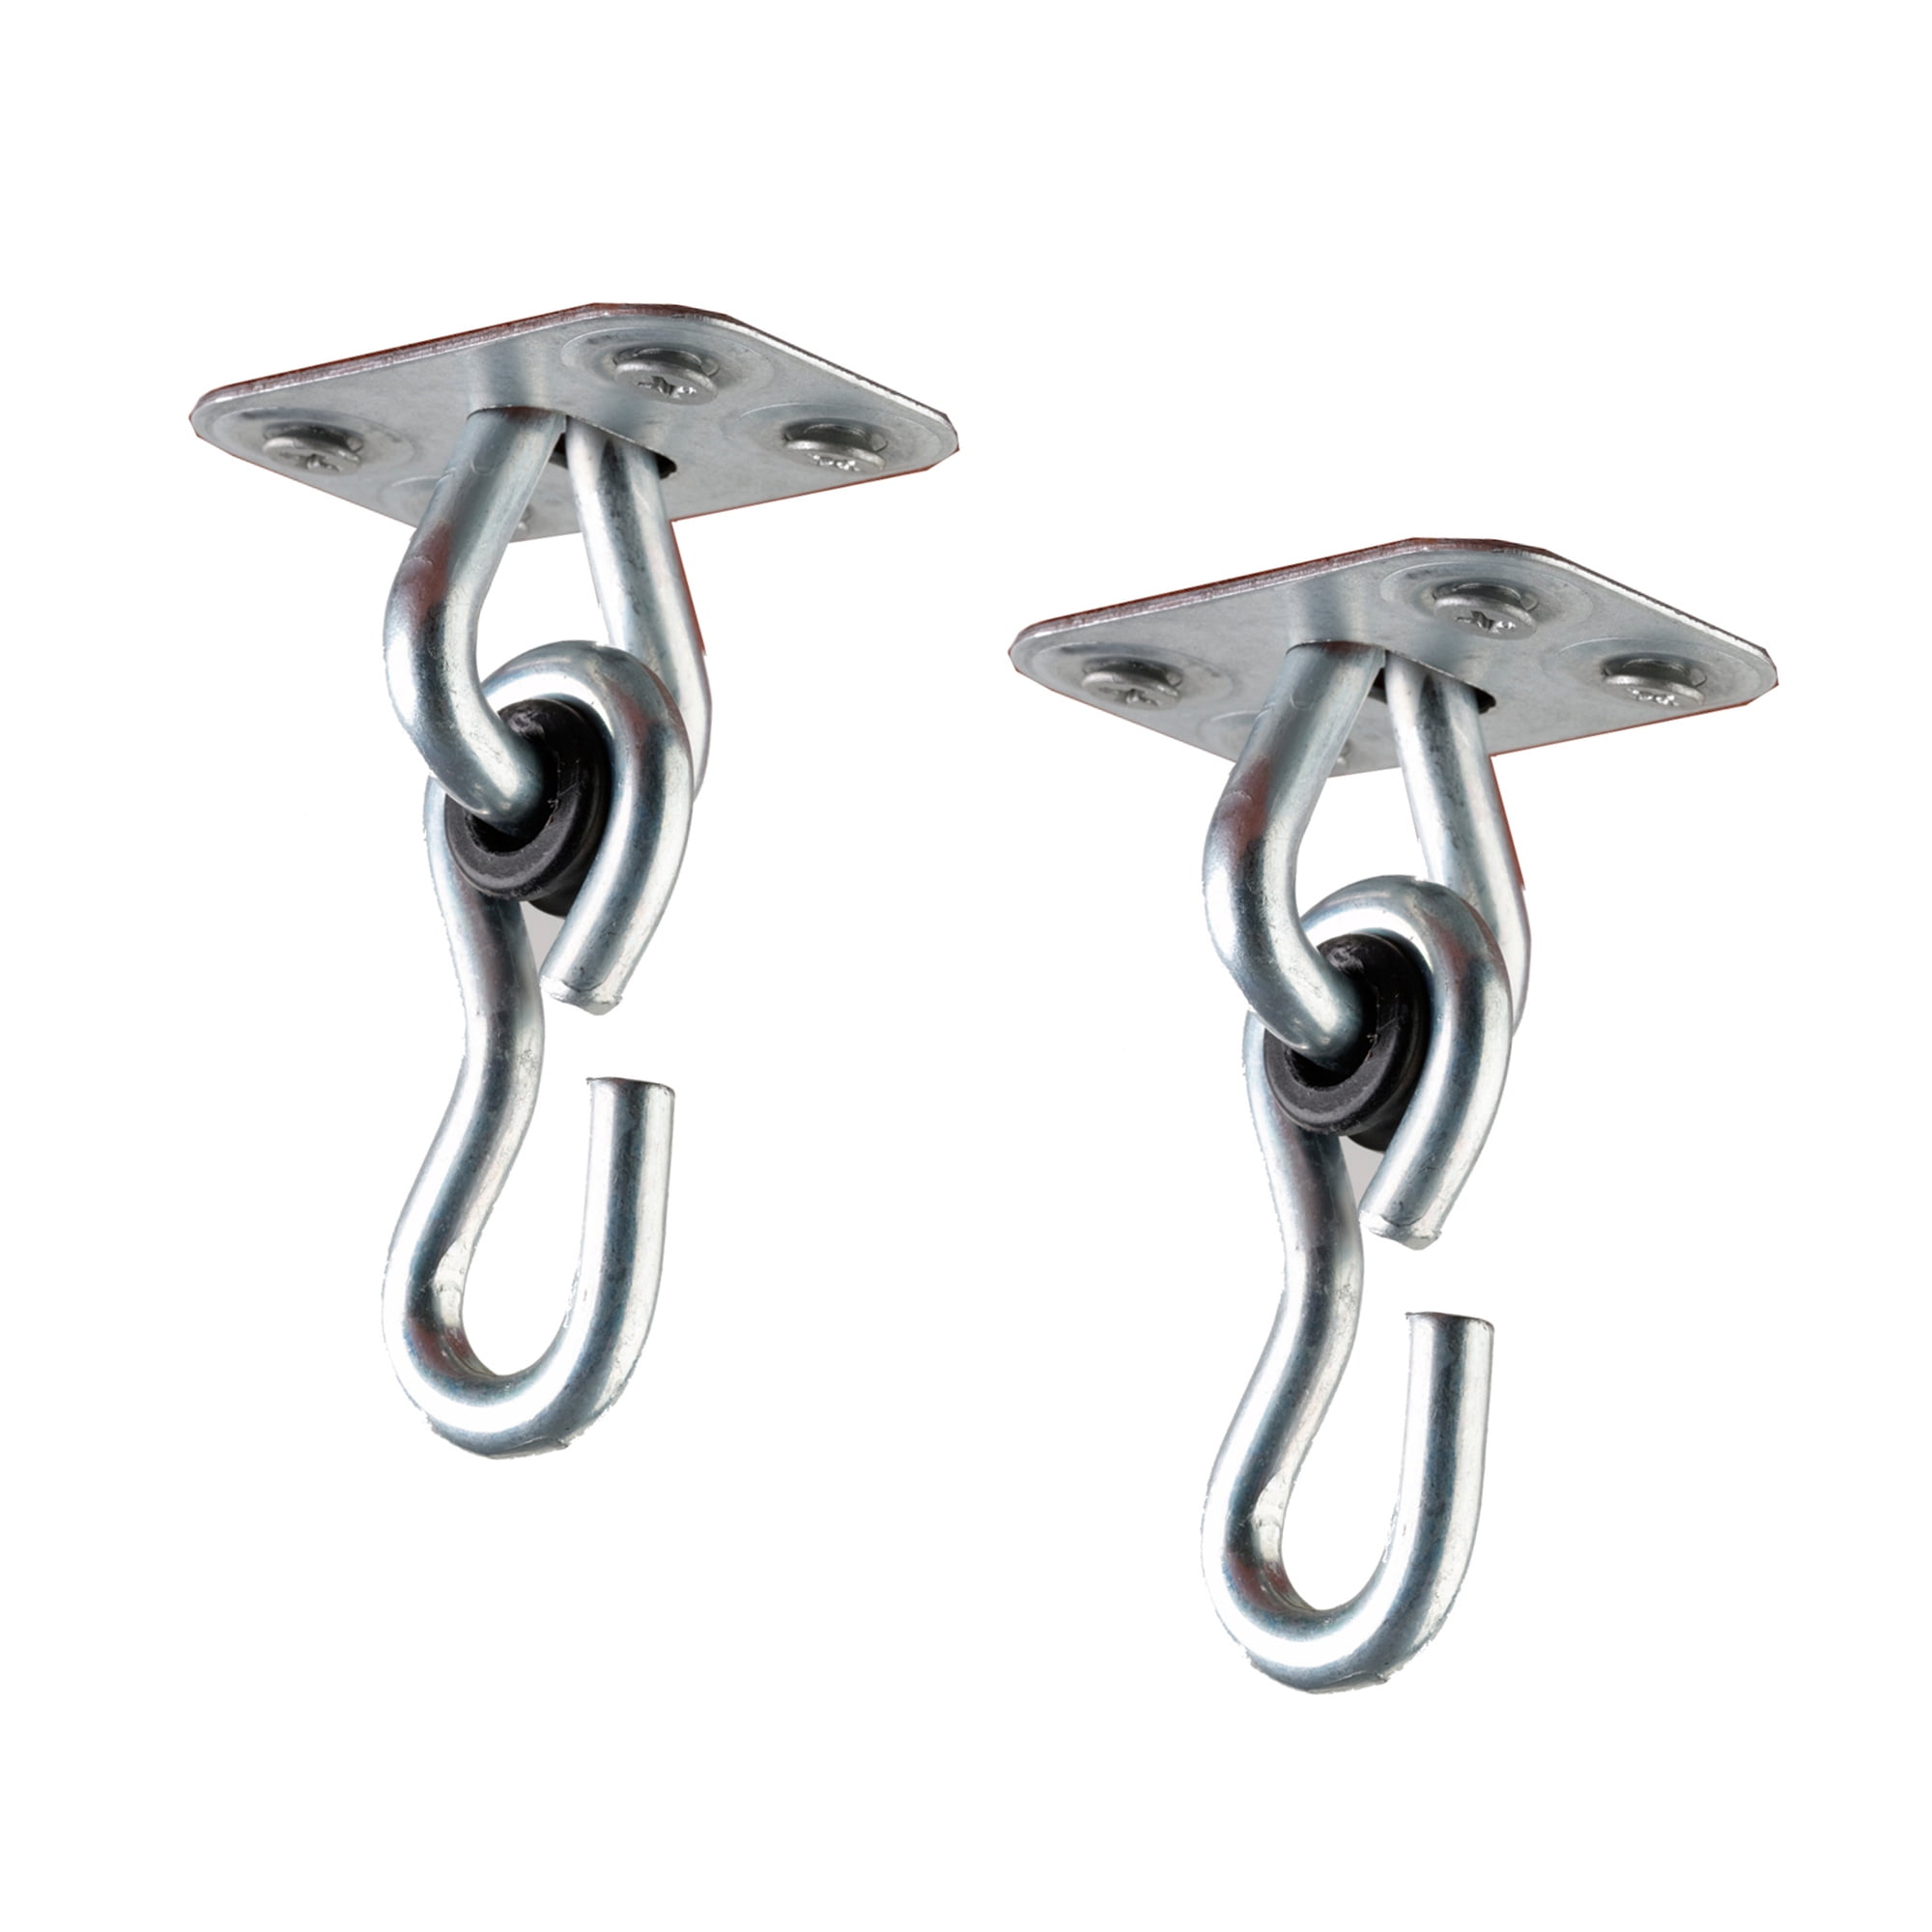 2 Packs Silver Details about   Aluminum Bearing Heavy Duty Swing Hanger for Play & Swing Sets 